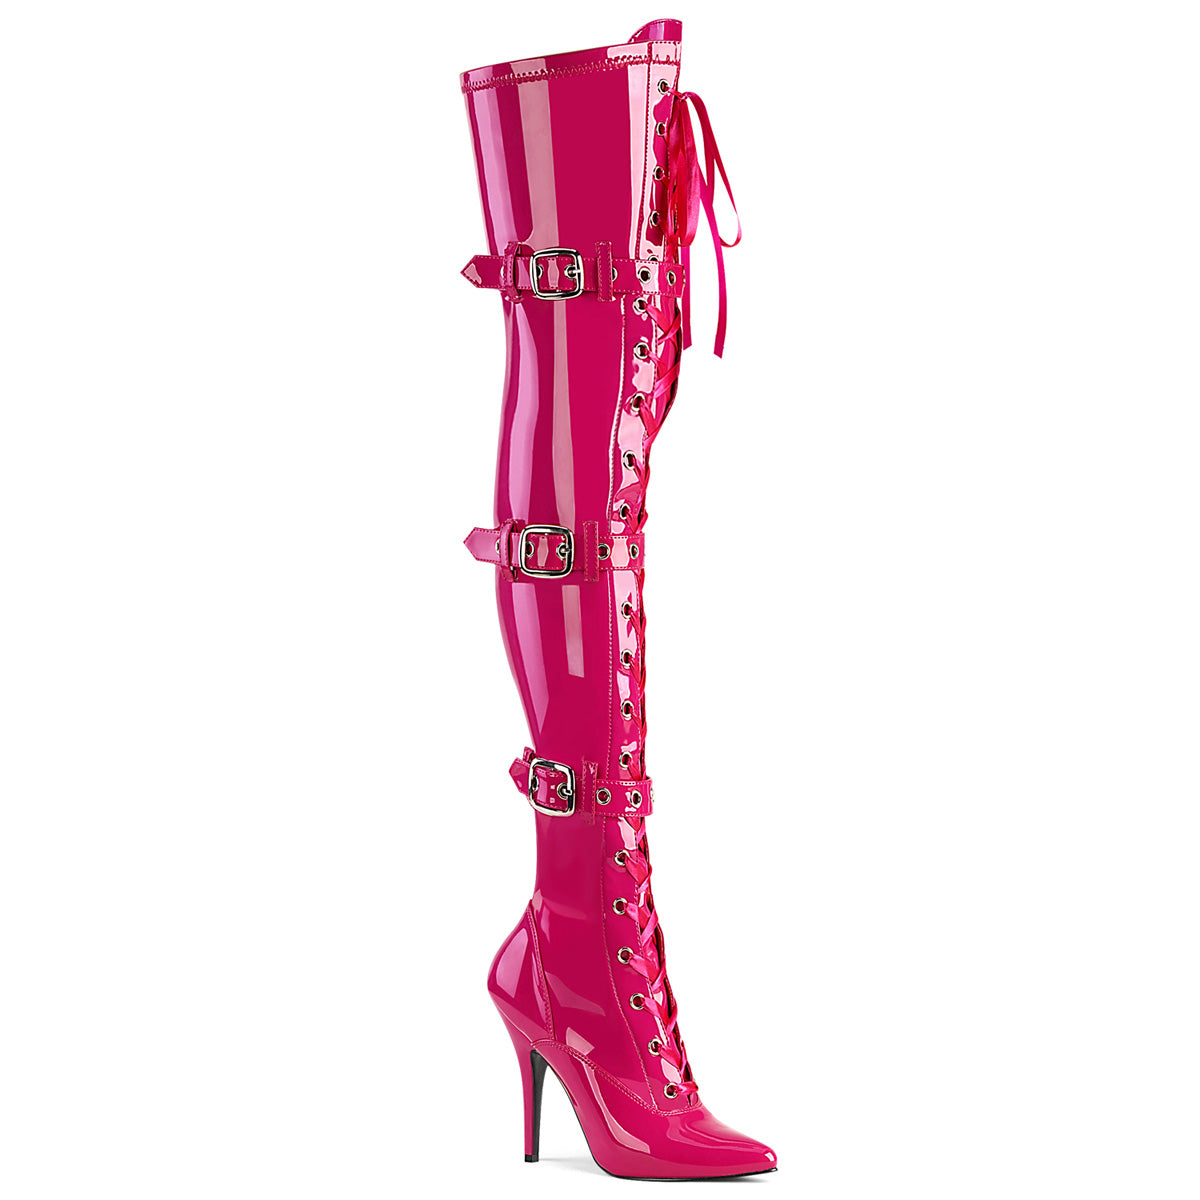 Pleaser SEDUCE-3028 Hot Pink Stretch Pat 5 Inch (127mm) Heel Ribbon Lace-Up Triple Buckle Strap Stretch Thigh High Boot, Full Inside Zip Closure